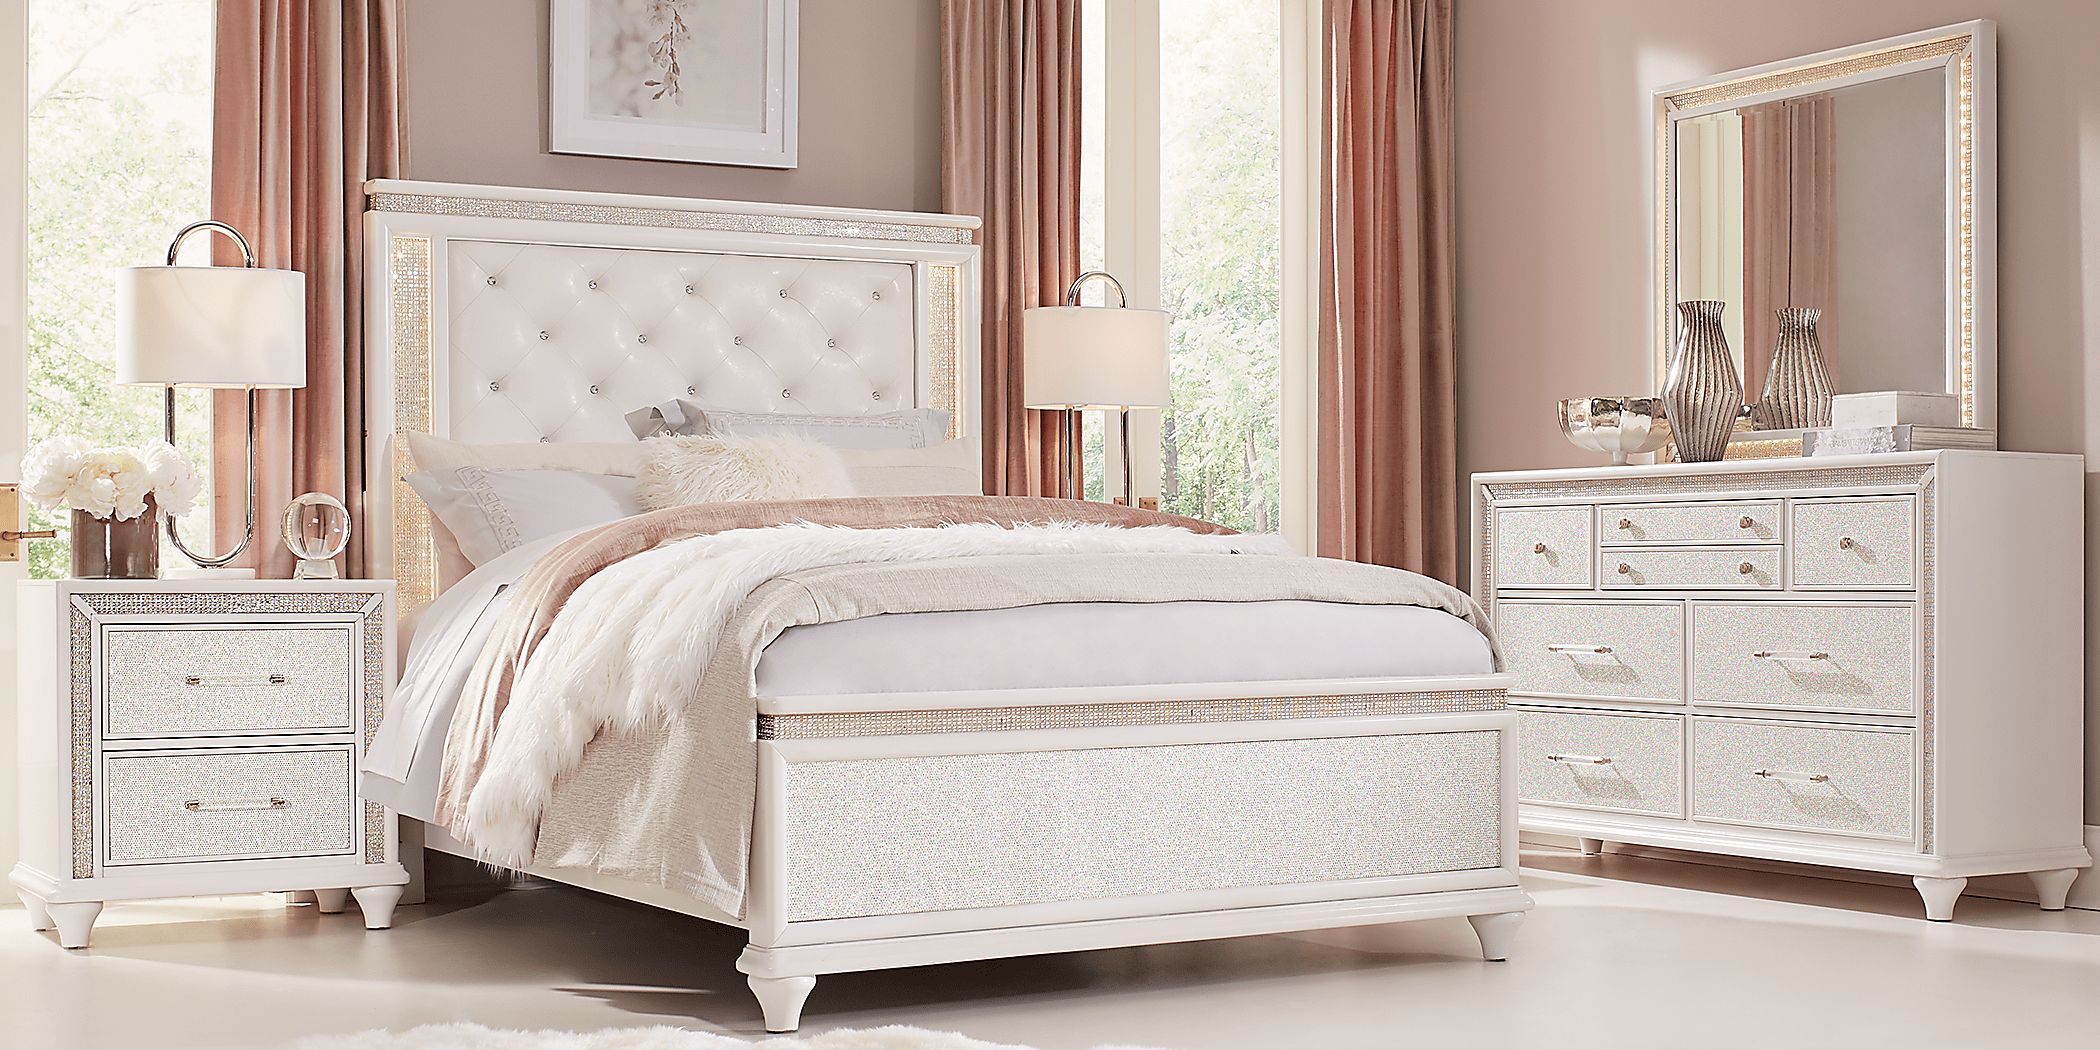 Vegas 5 Pc White Colors,White Queen Bedroom Set With Dresser, Mirror, 3 Pc  Queen Panel Bed - Rooms To Go